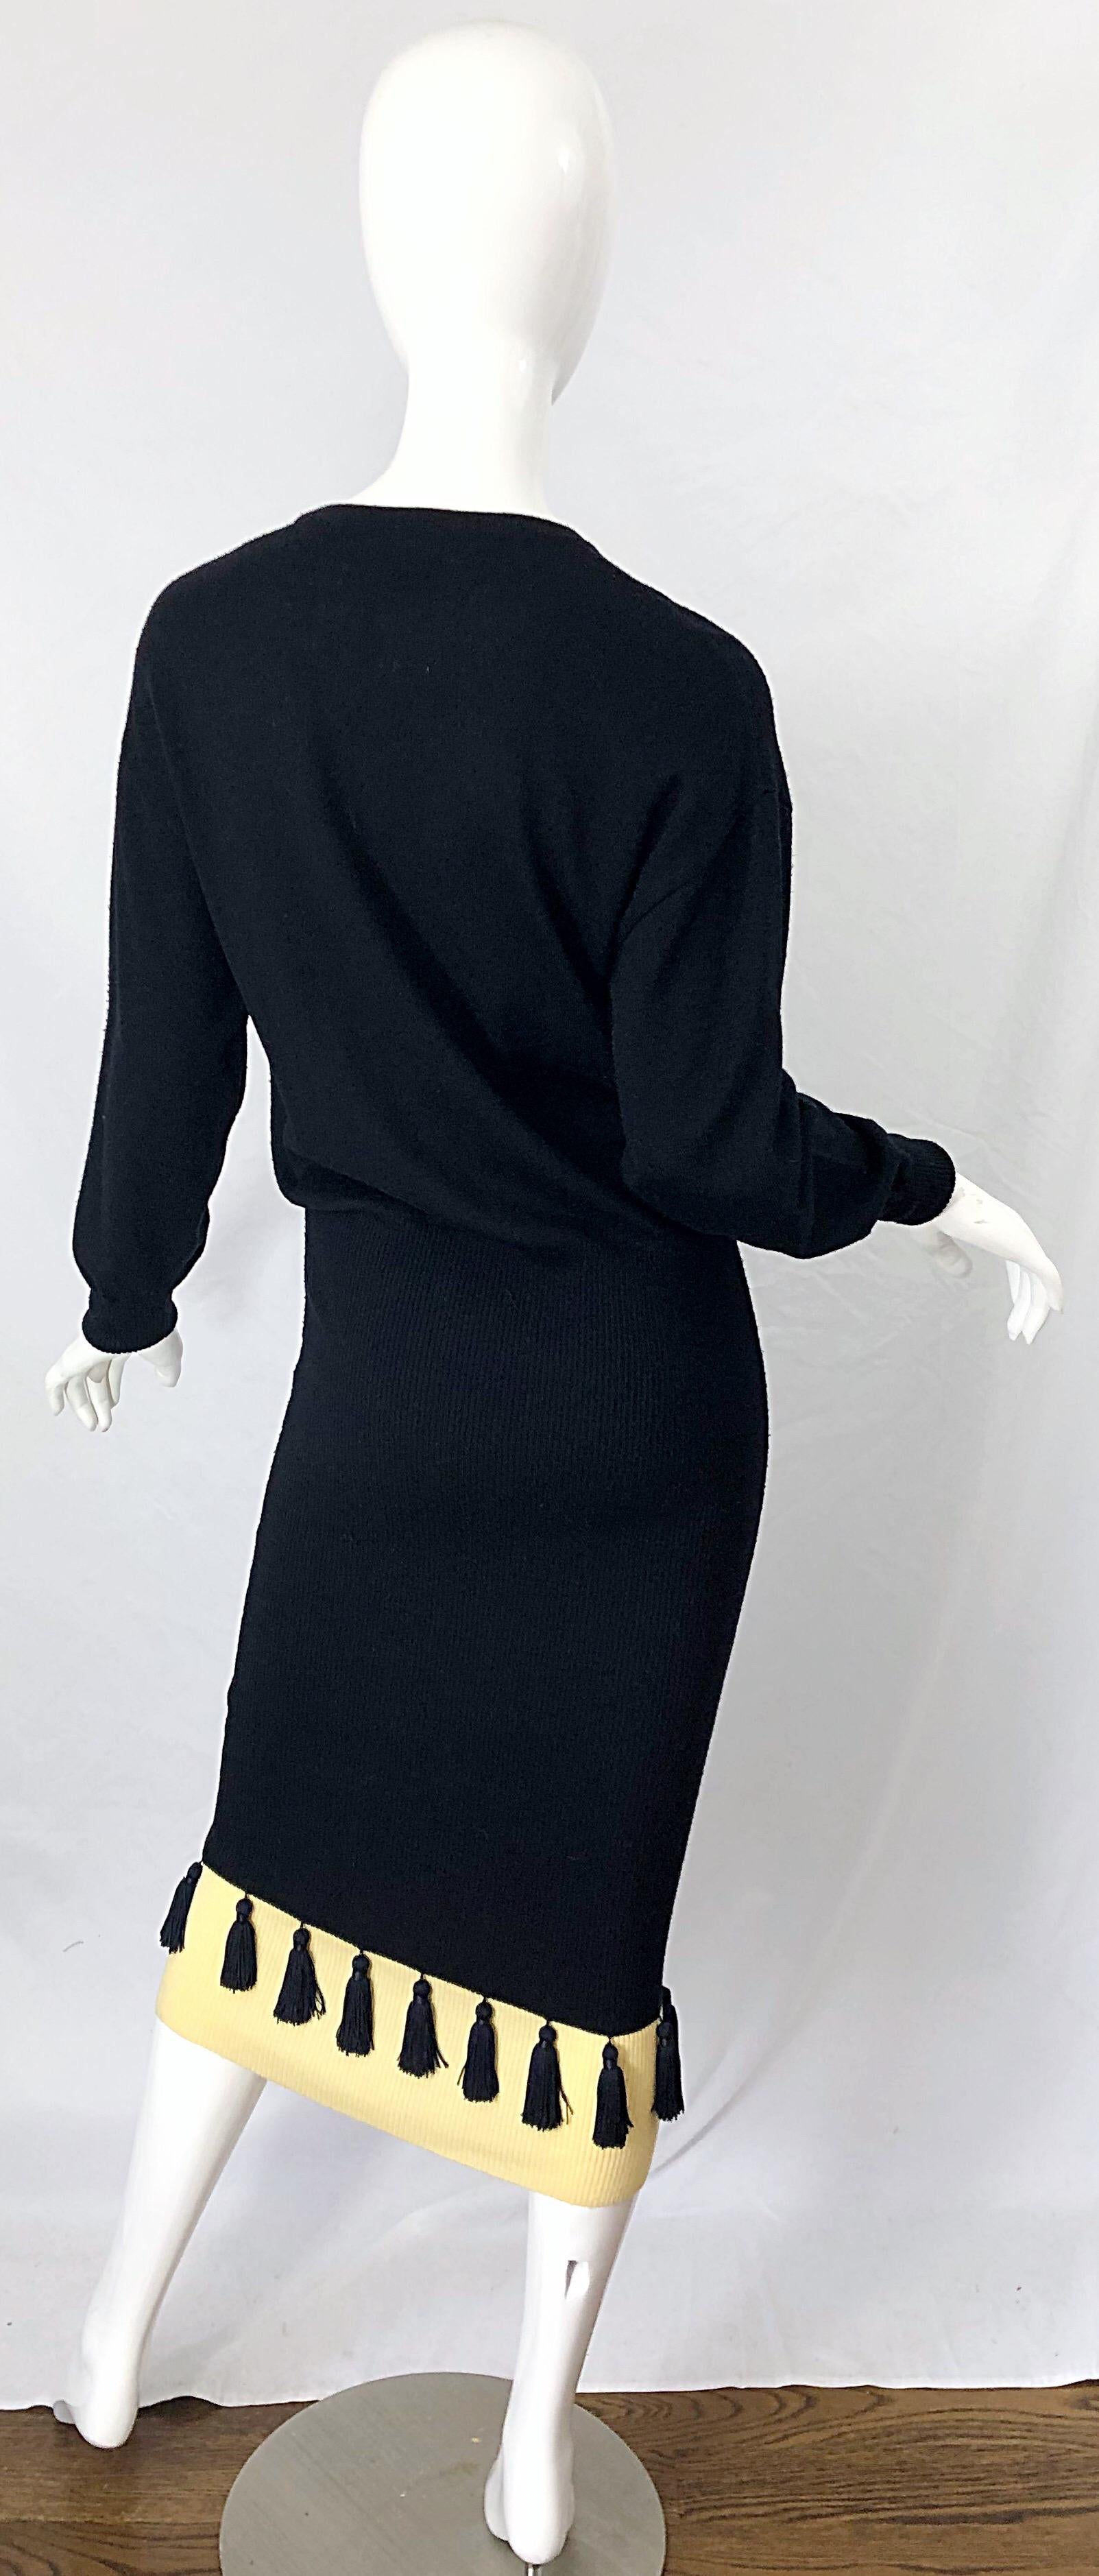 1980s Angelo Tarlazzi Black and Ivory Wool Dolman Sleeve 80s Sweater Dress For Sale 6